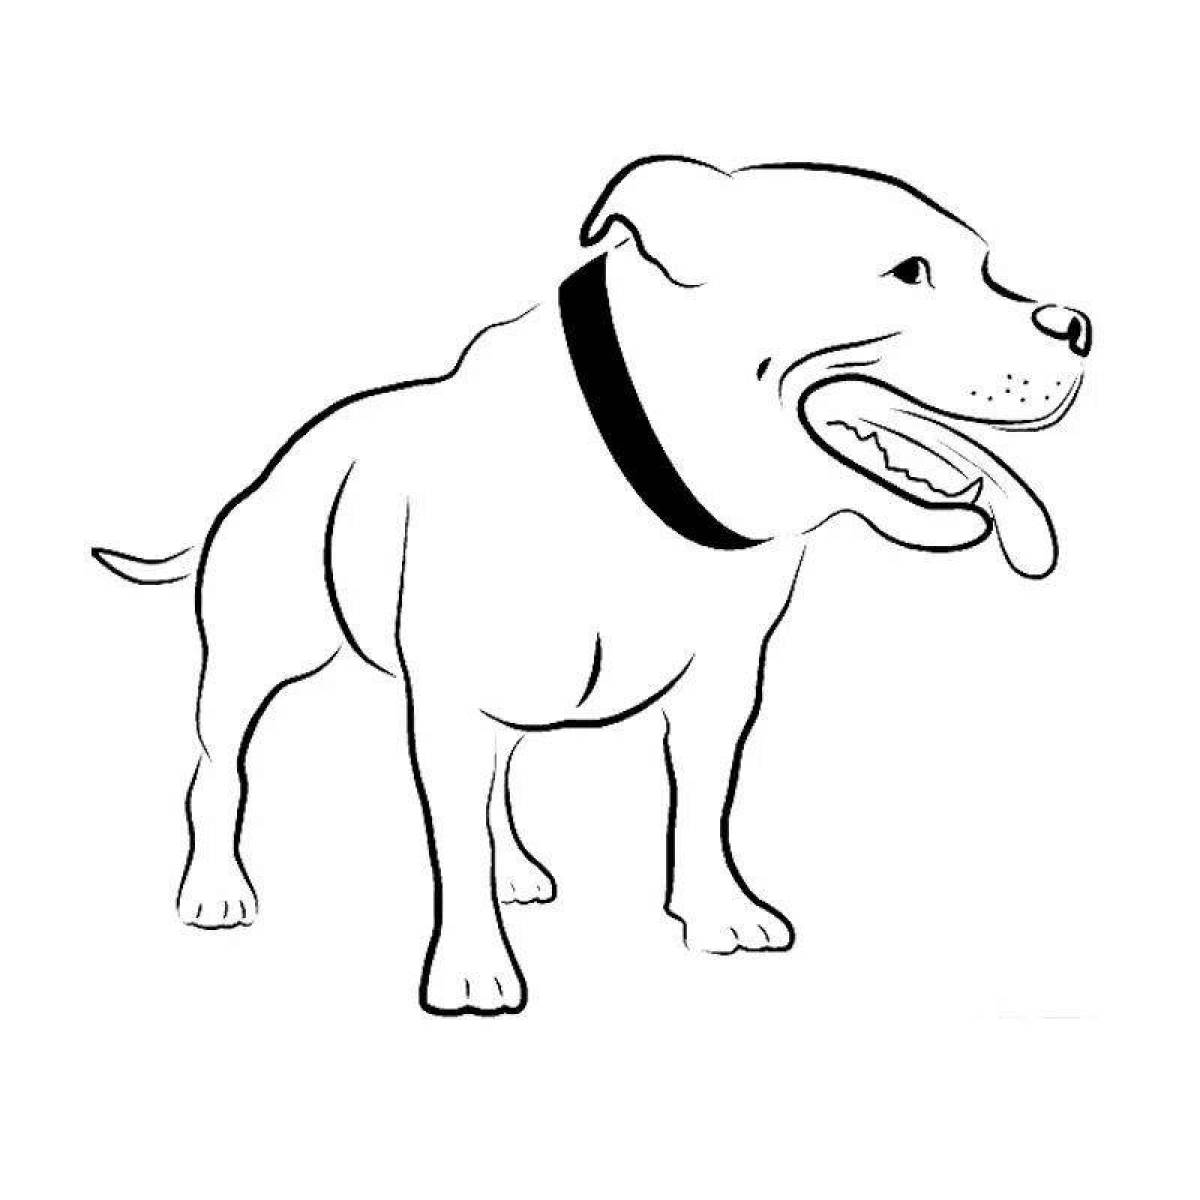 Courtesy Bull Terrier coloring pages